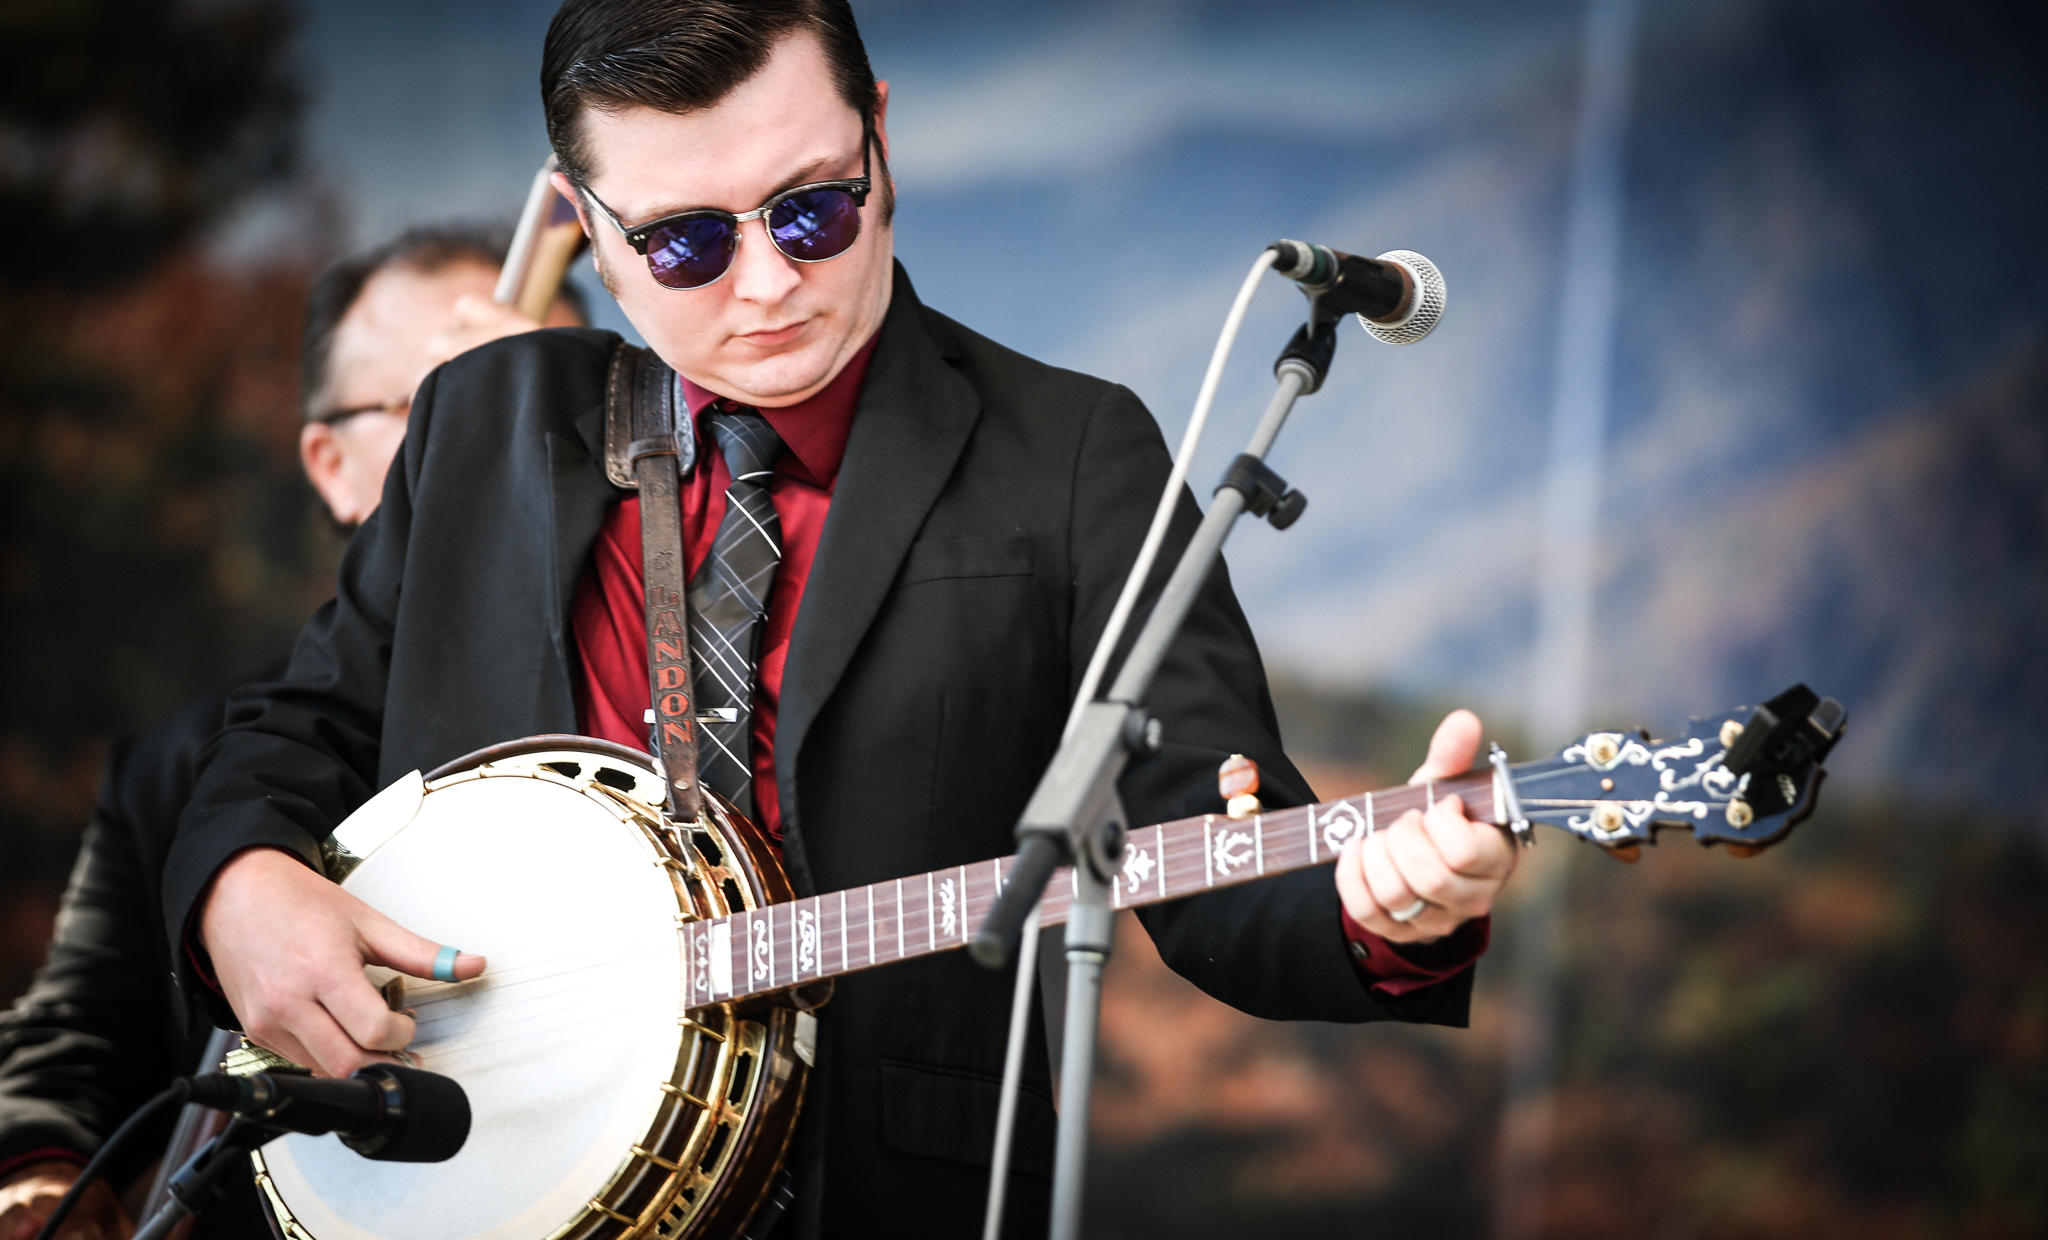 Banjo is a important instrument for making bluegrass music. 